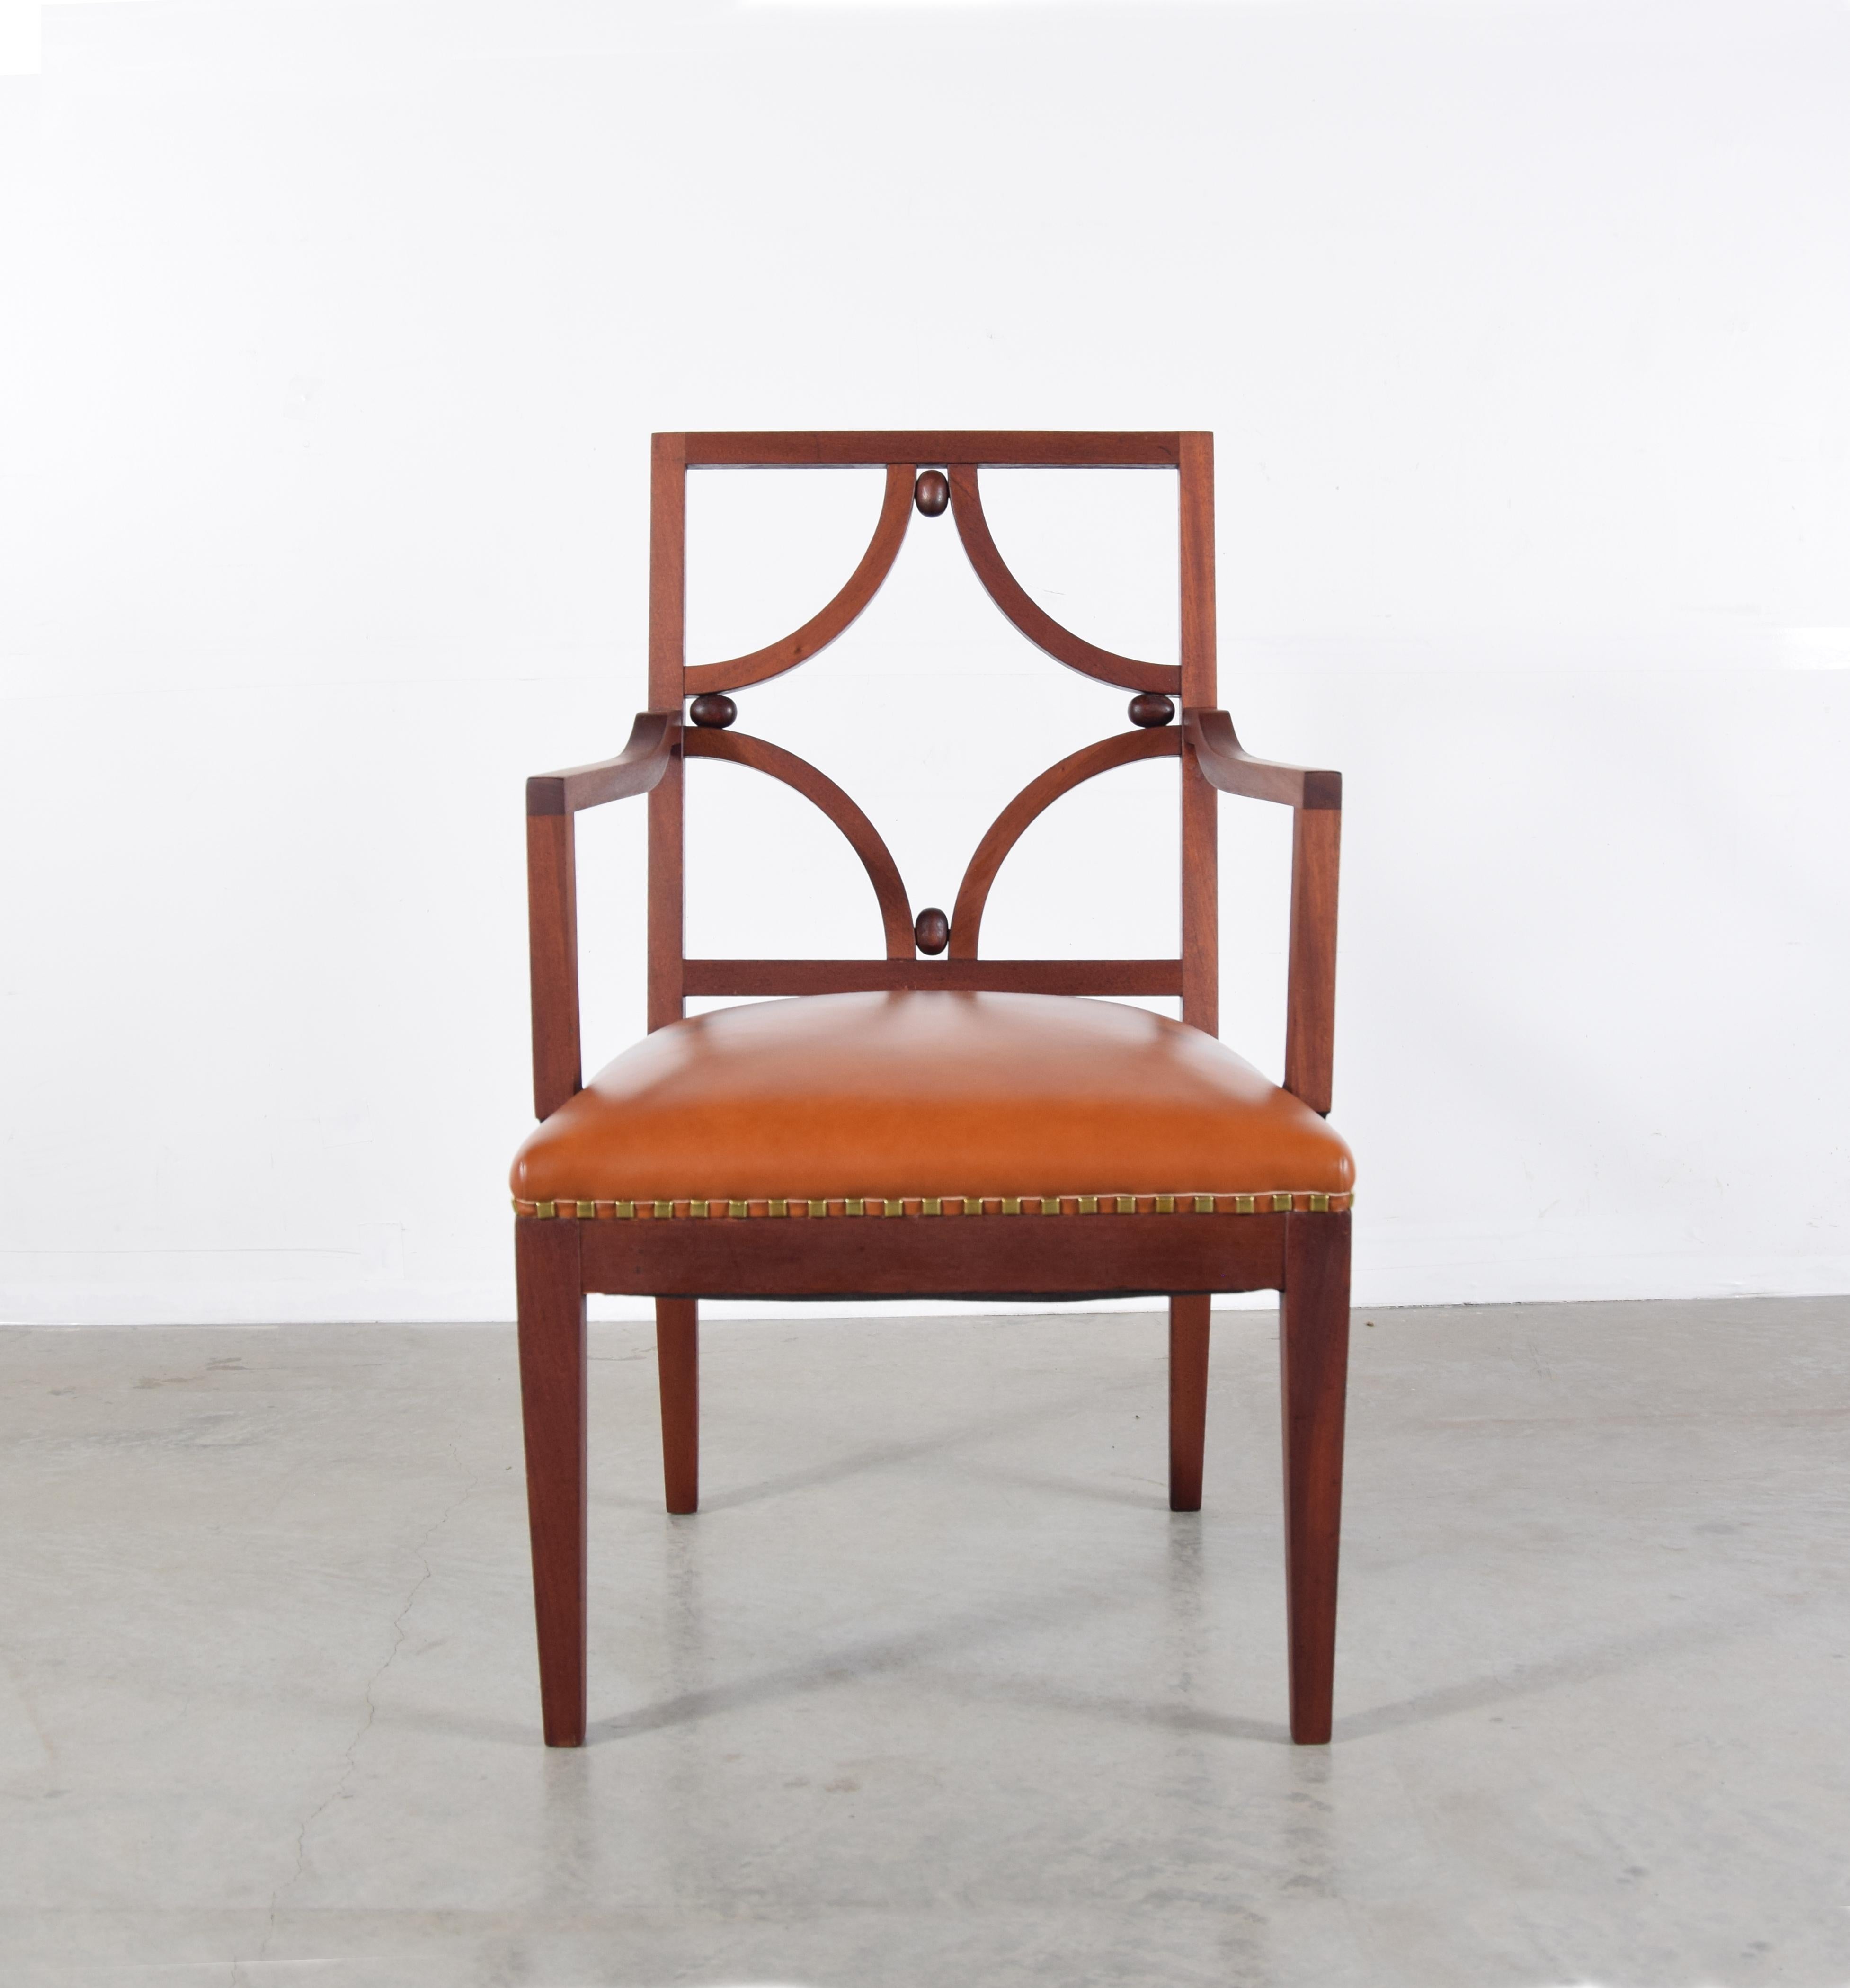 Armchair in mahogany, designed by Bruno Paul, circa 1910. Produced by Vereinigte Werkstatten, Munich, Germany. Newly upholstered in leather. Measures: 22 1/4